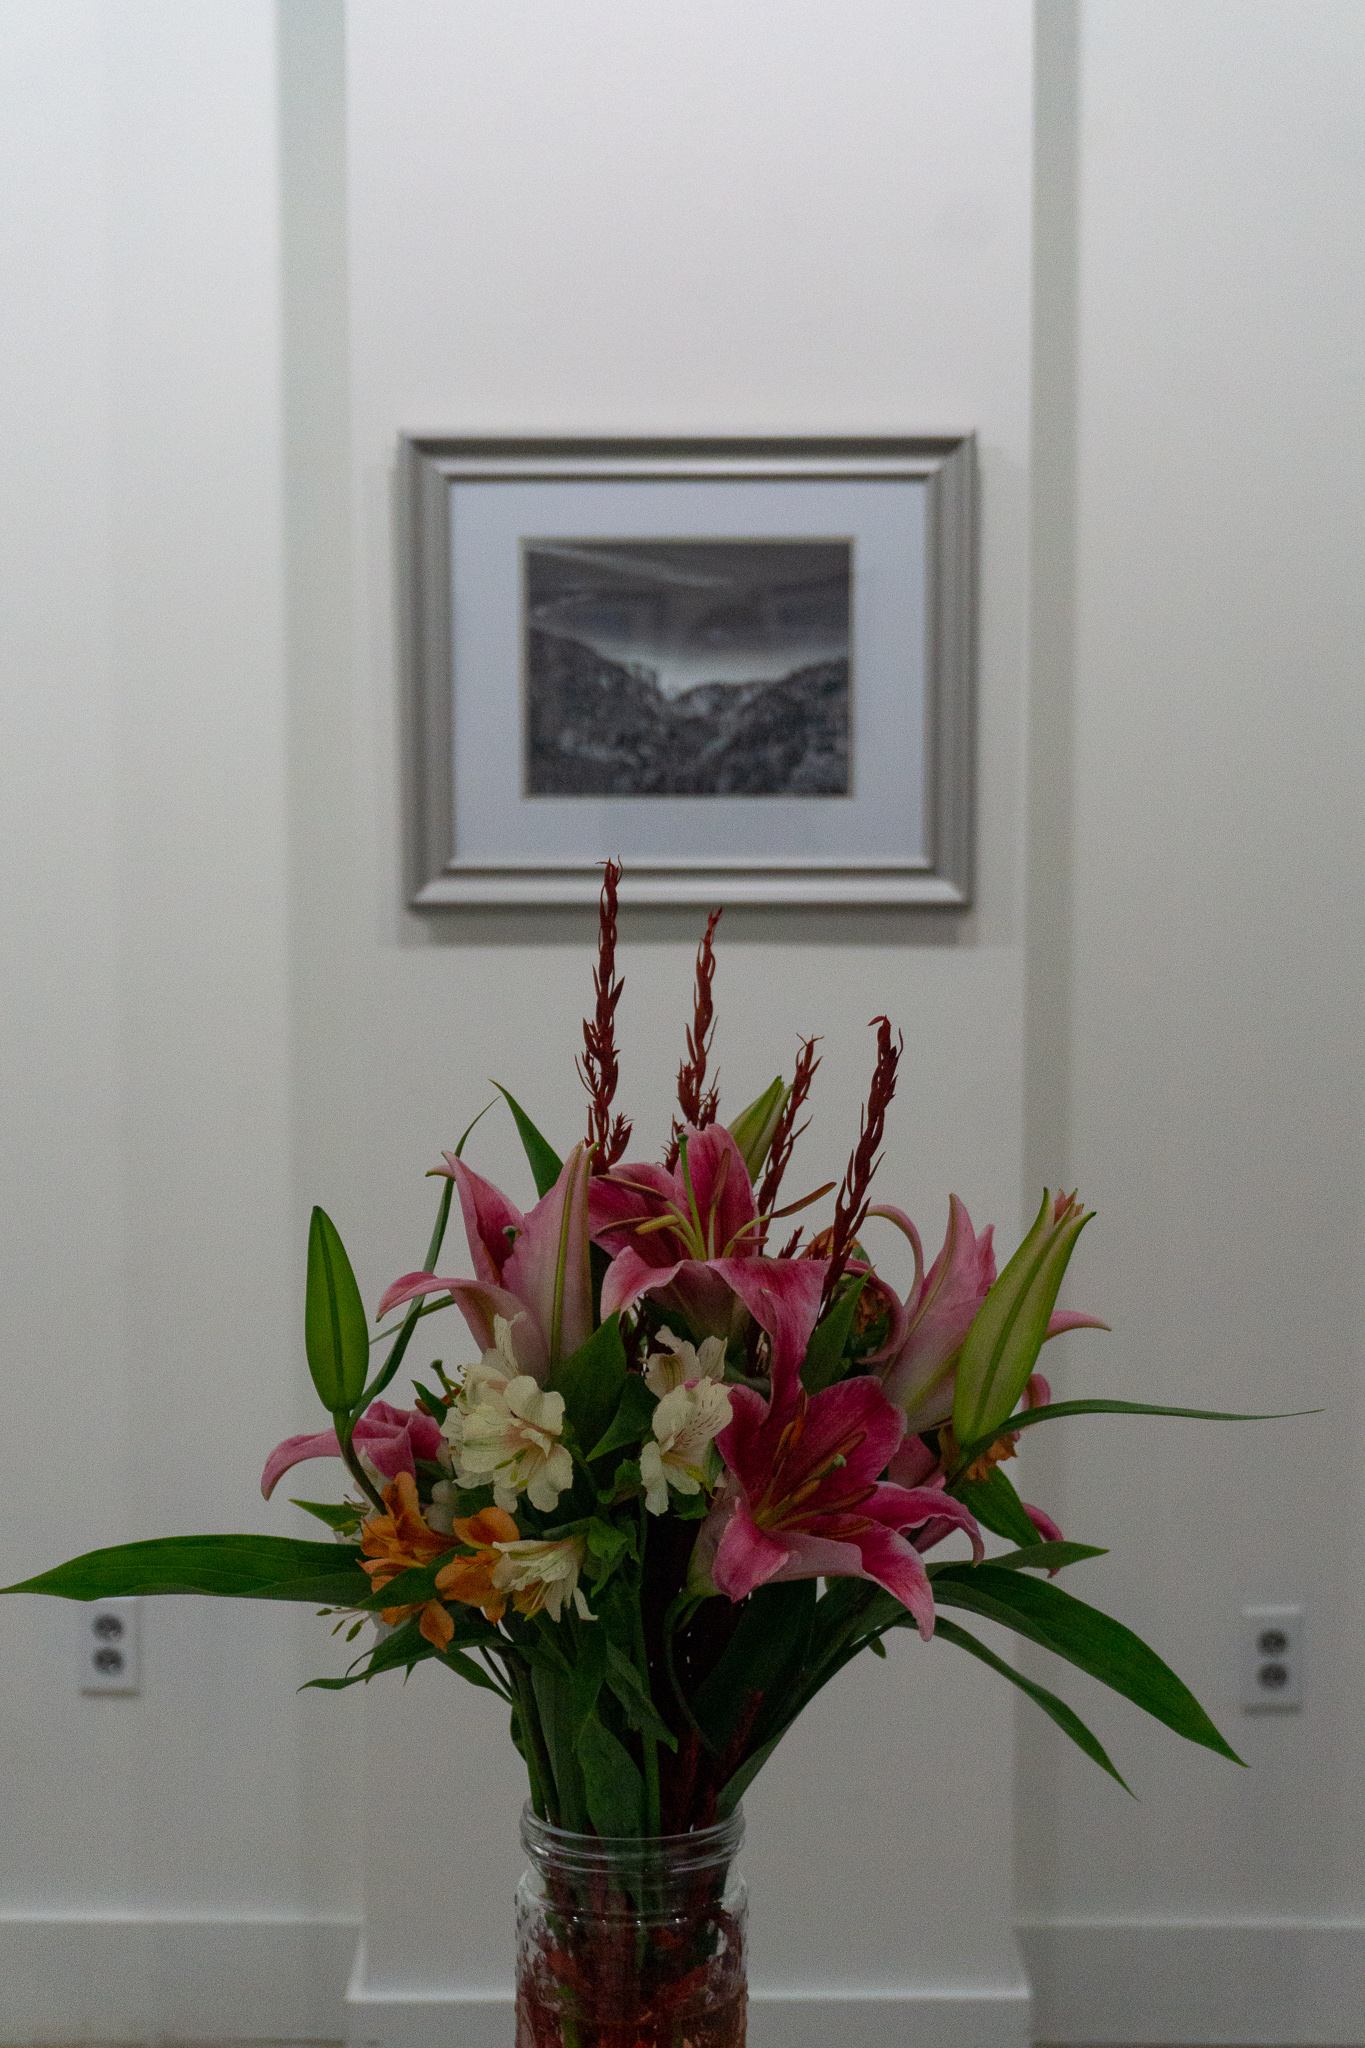 A framed landscape photograph on the wall above a houseplant